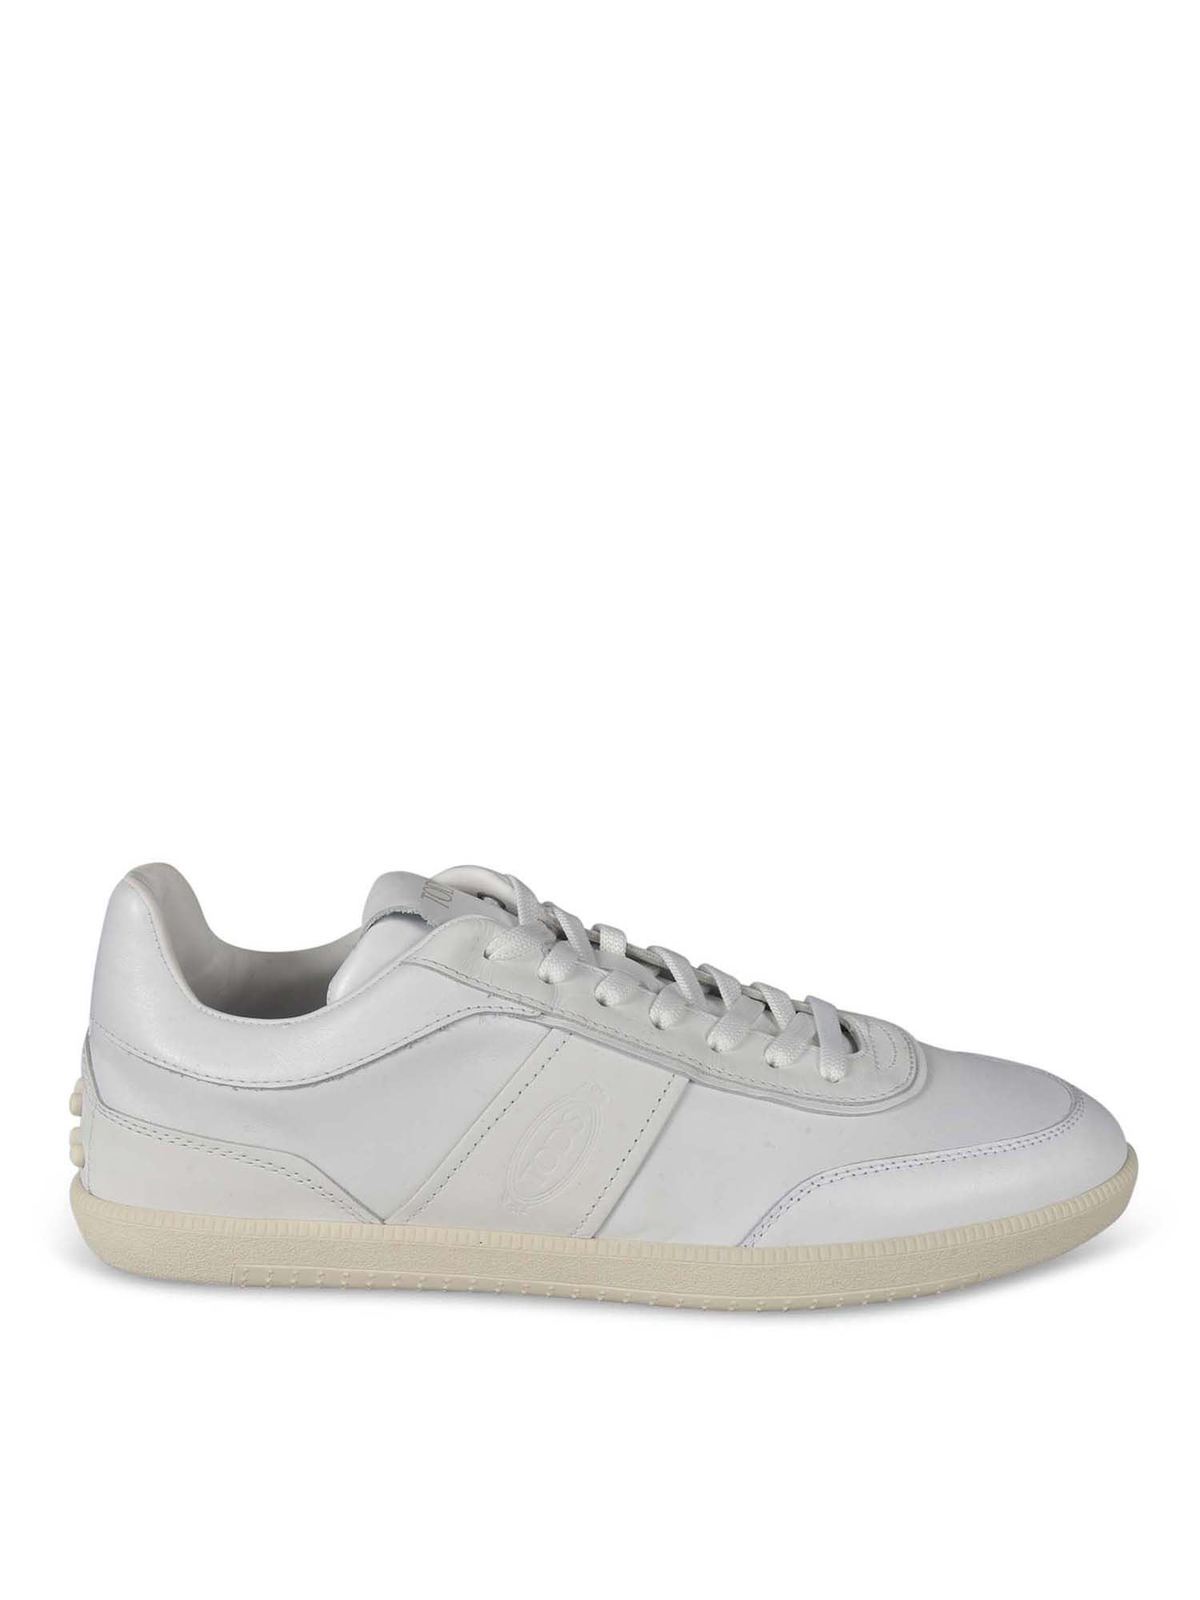 Tod's Vintage Design Leather Sneakers In White